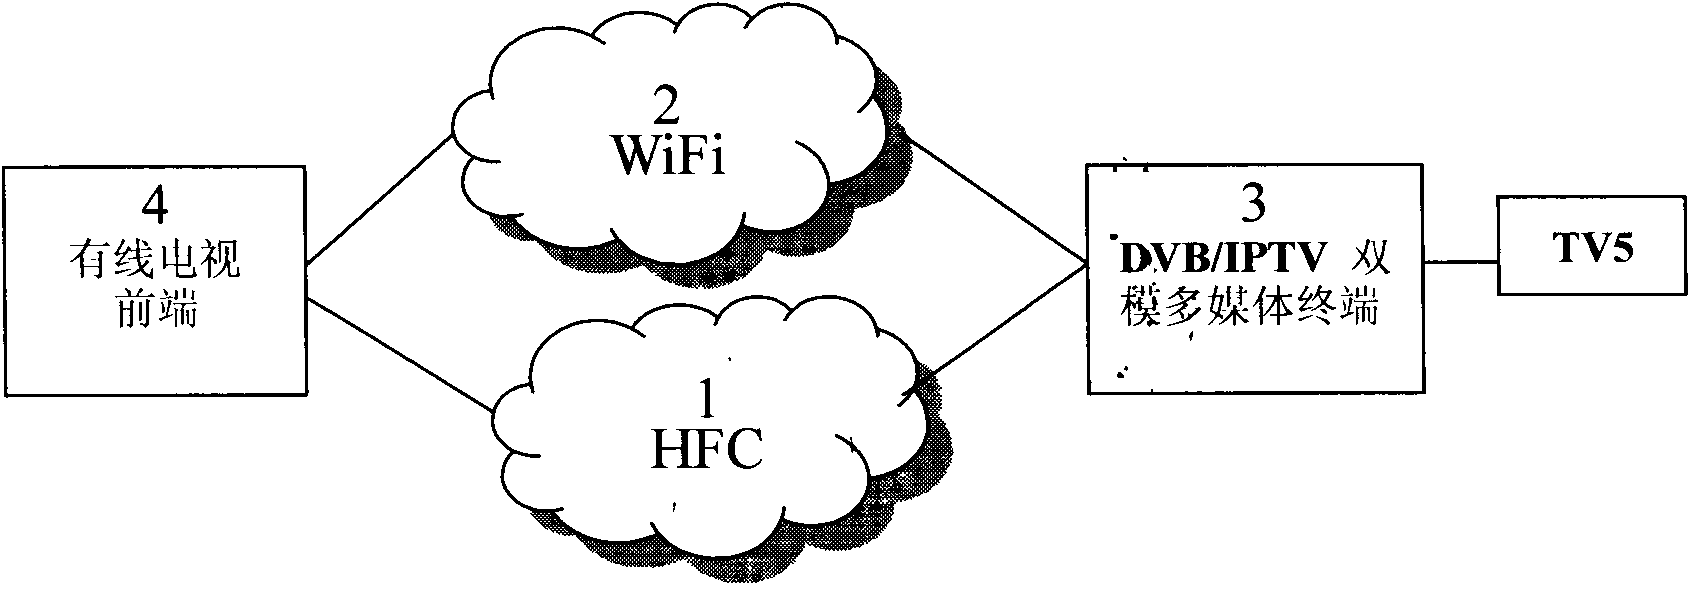 Bidirectional network rebuilding method for combining wireless fidelity (WiFi) wireless network with unidirectional cable television network